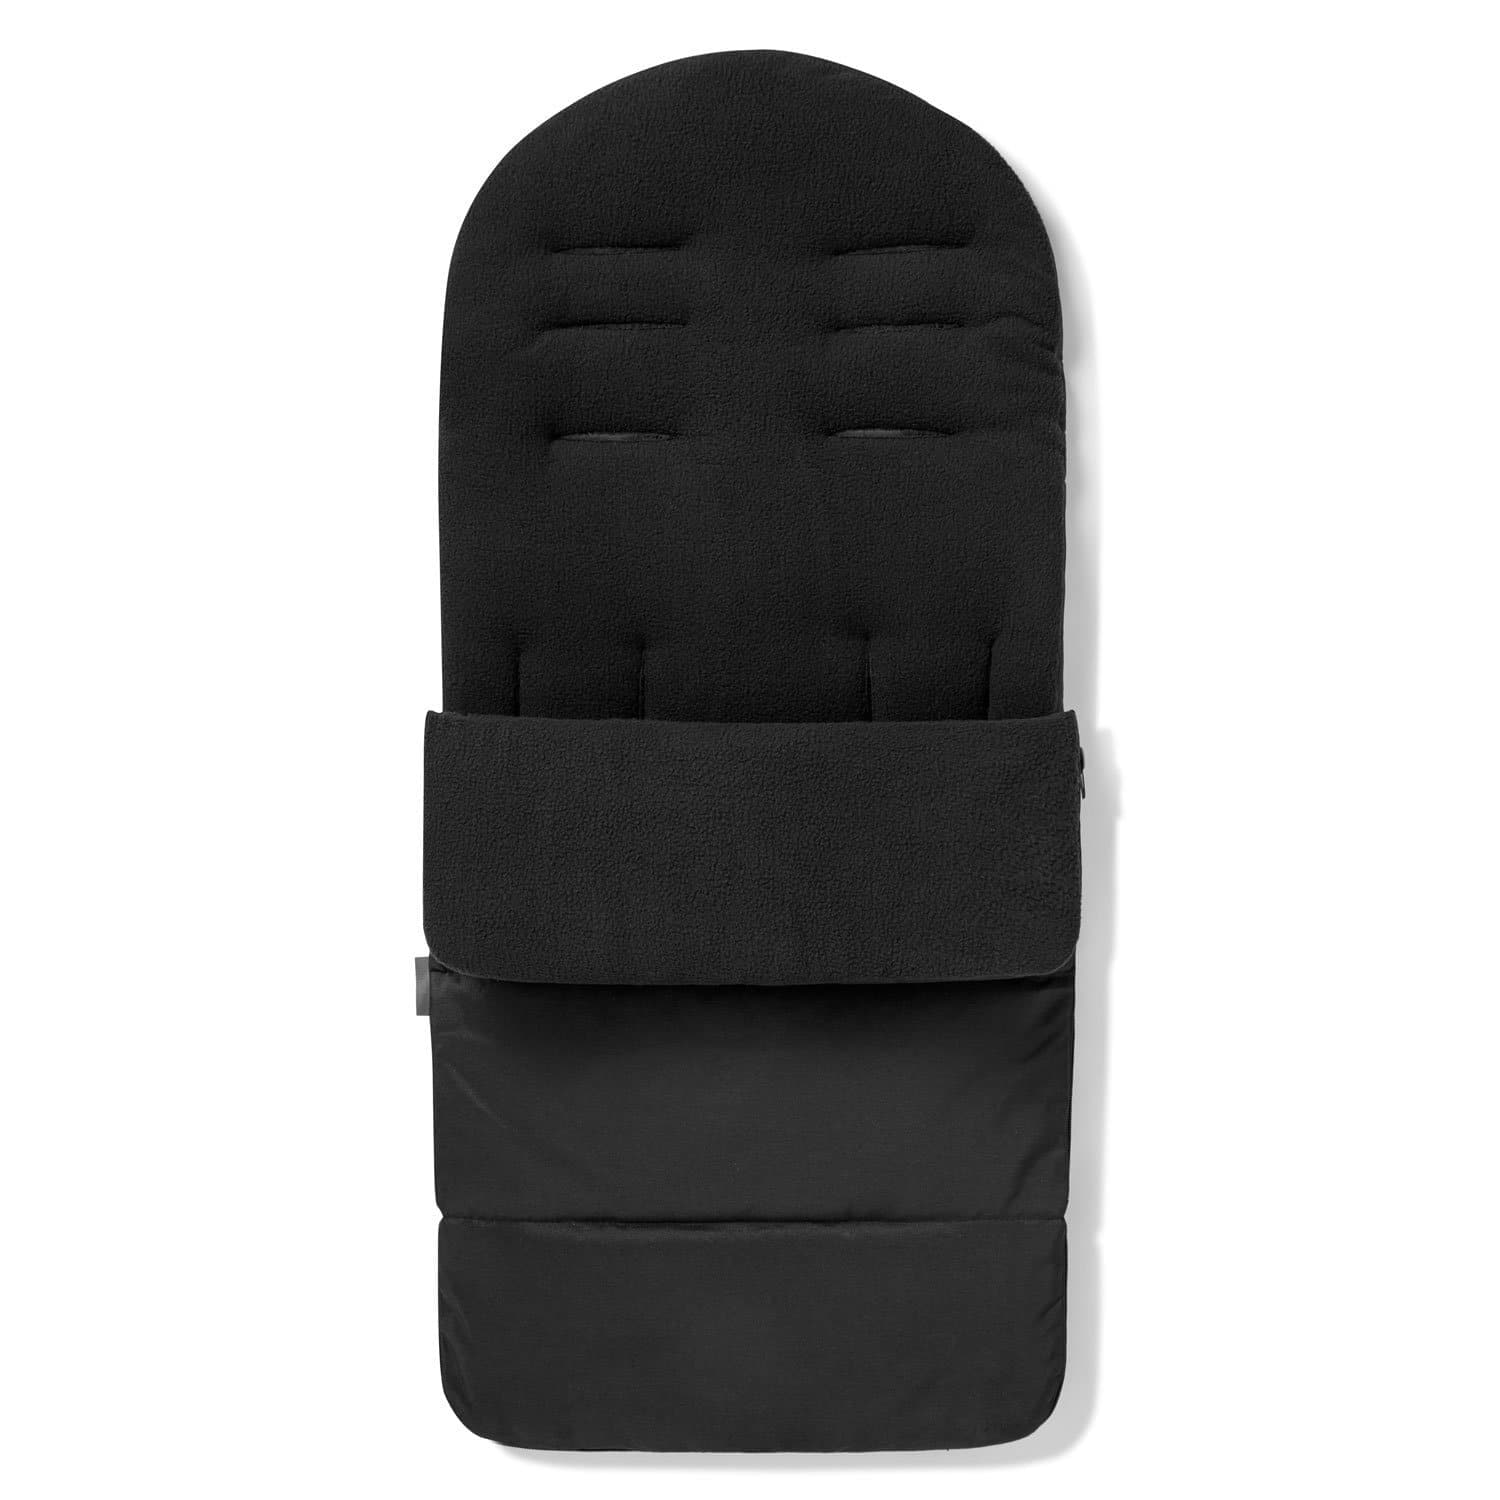 Premium Footmuff / Cosy Toes Compatible with Norton - Black Jack / Fits All Models | For Your Little One